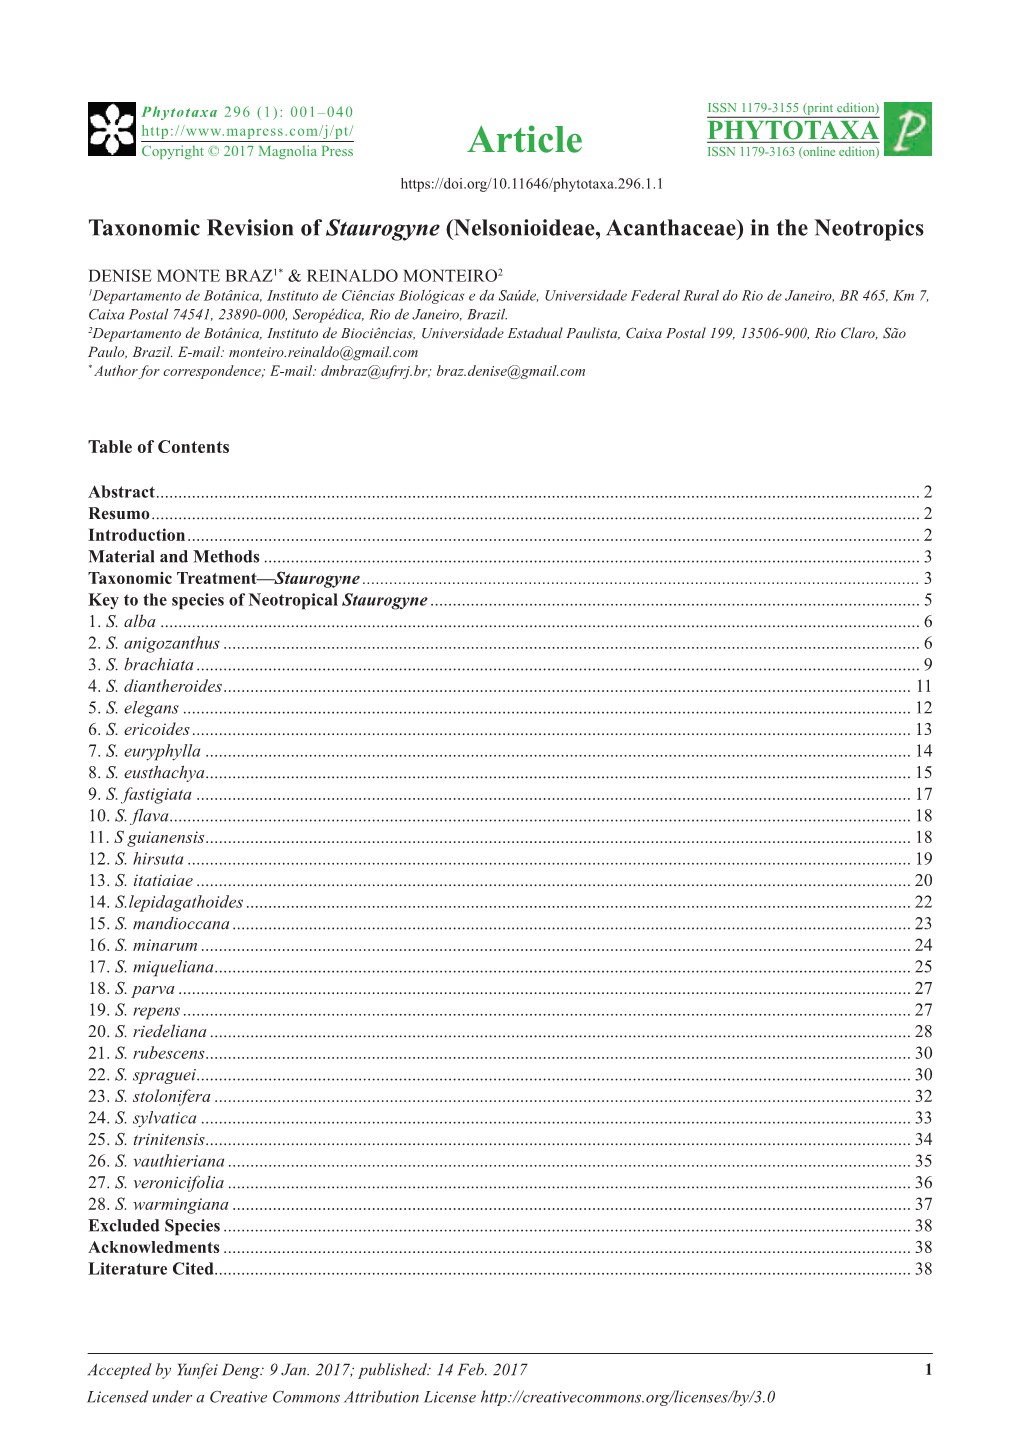 Taxonomic Revision of Staurogyne (Nelsonioideae, Acanthaceae) in the Neotropics